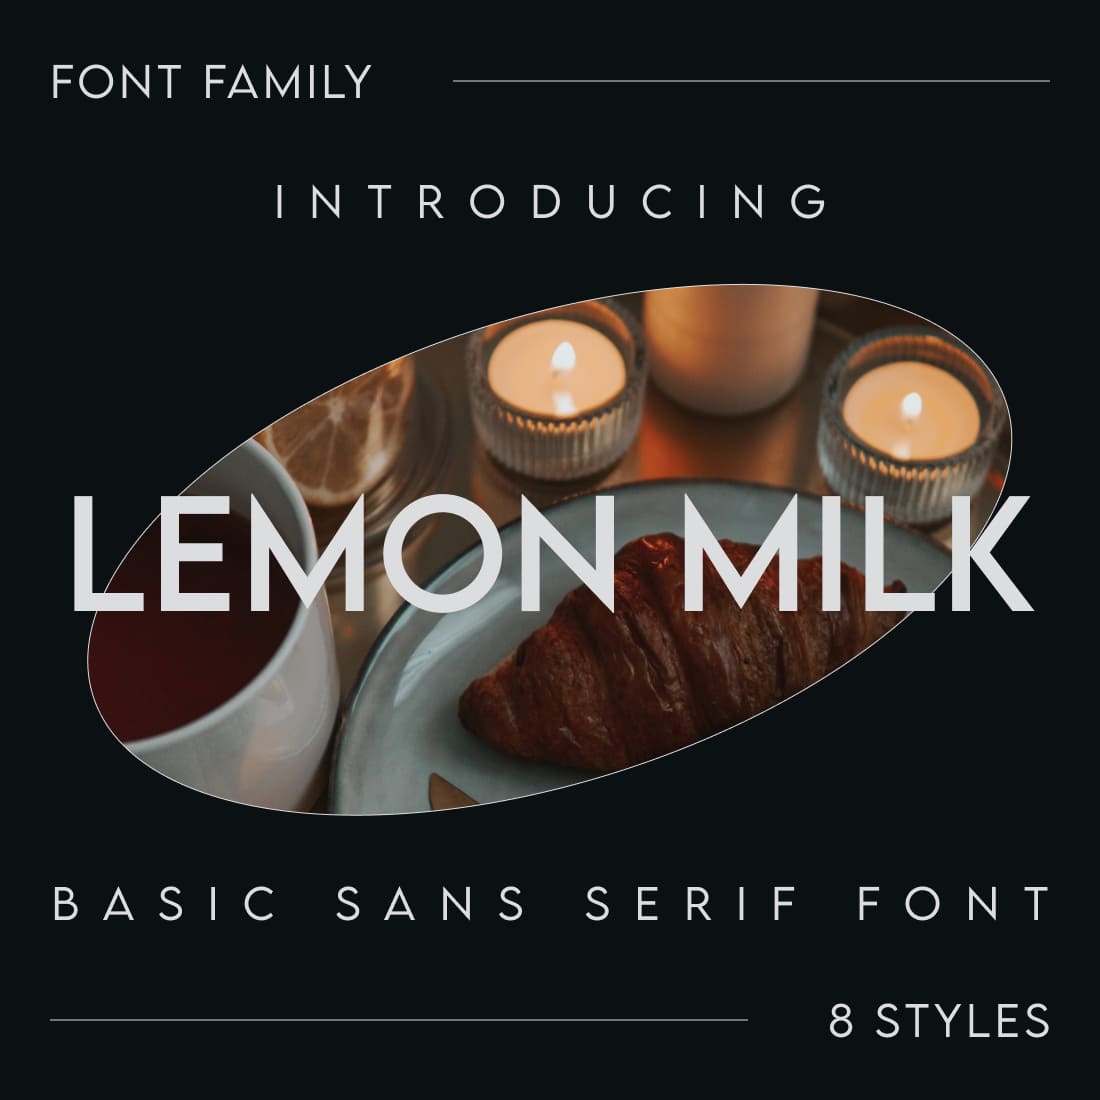 With a font like this, it's easy to create a cozy and warm atmosphere.